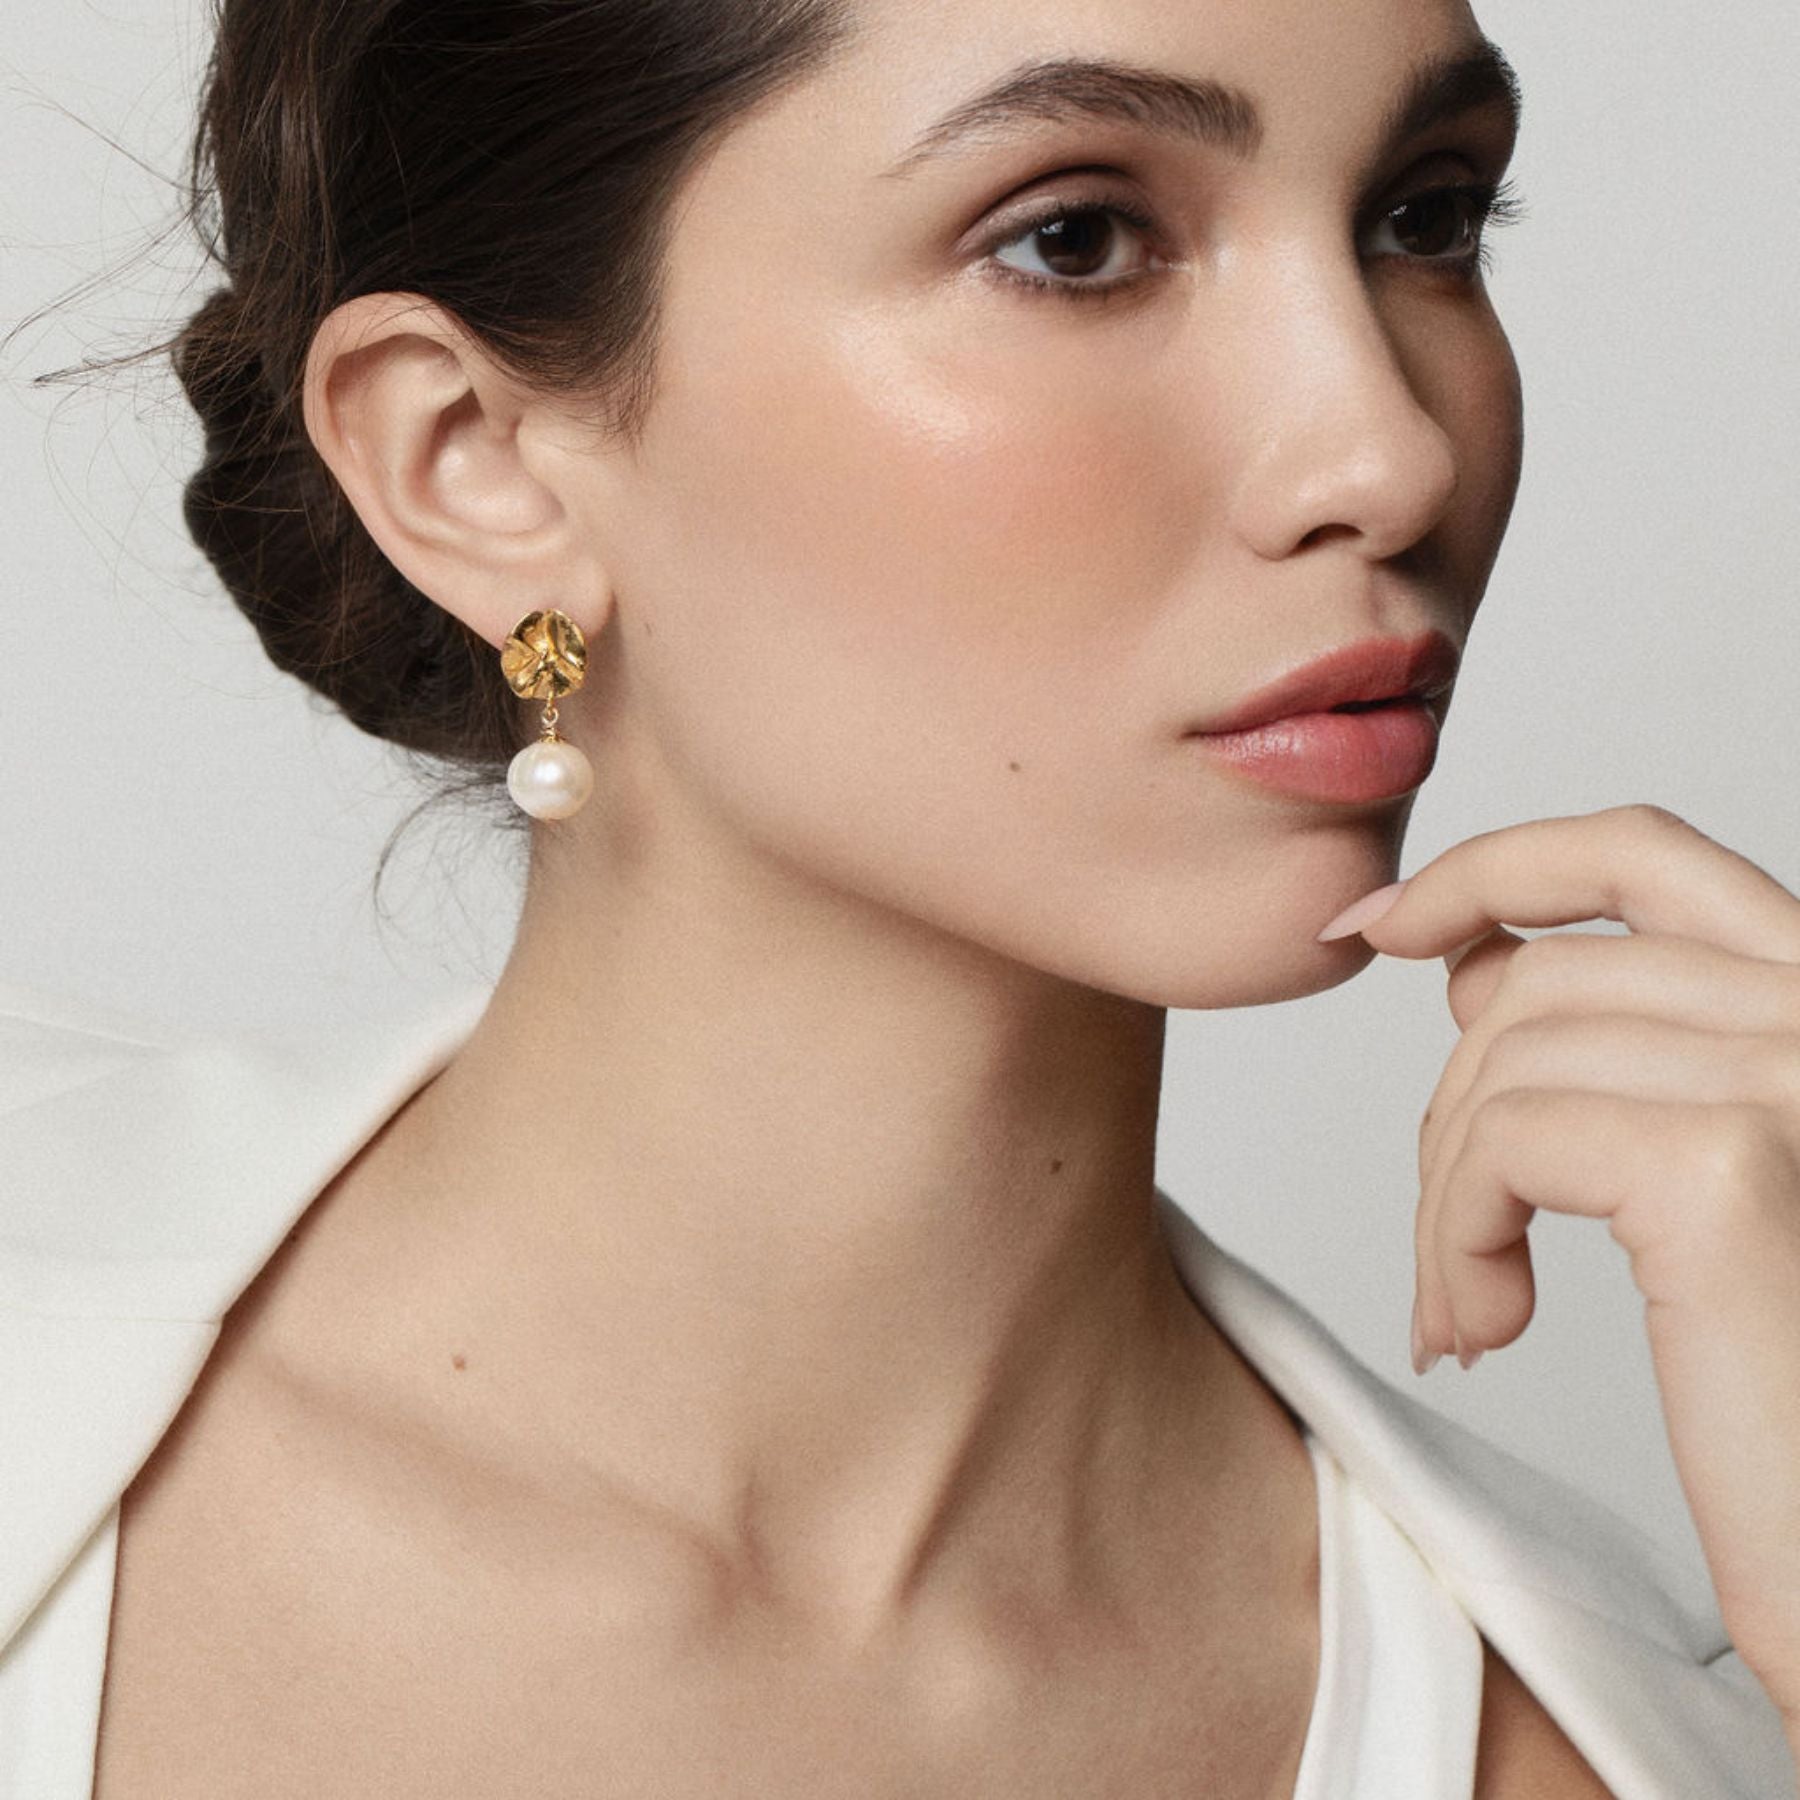 Model wearing Sculptural lily pad-like studs in 18k gold vermeil with a pearl drop.